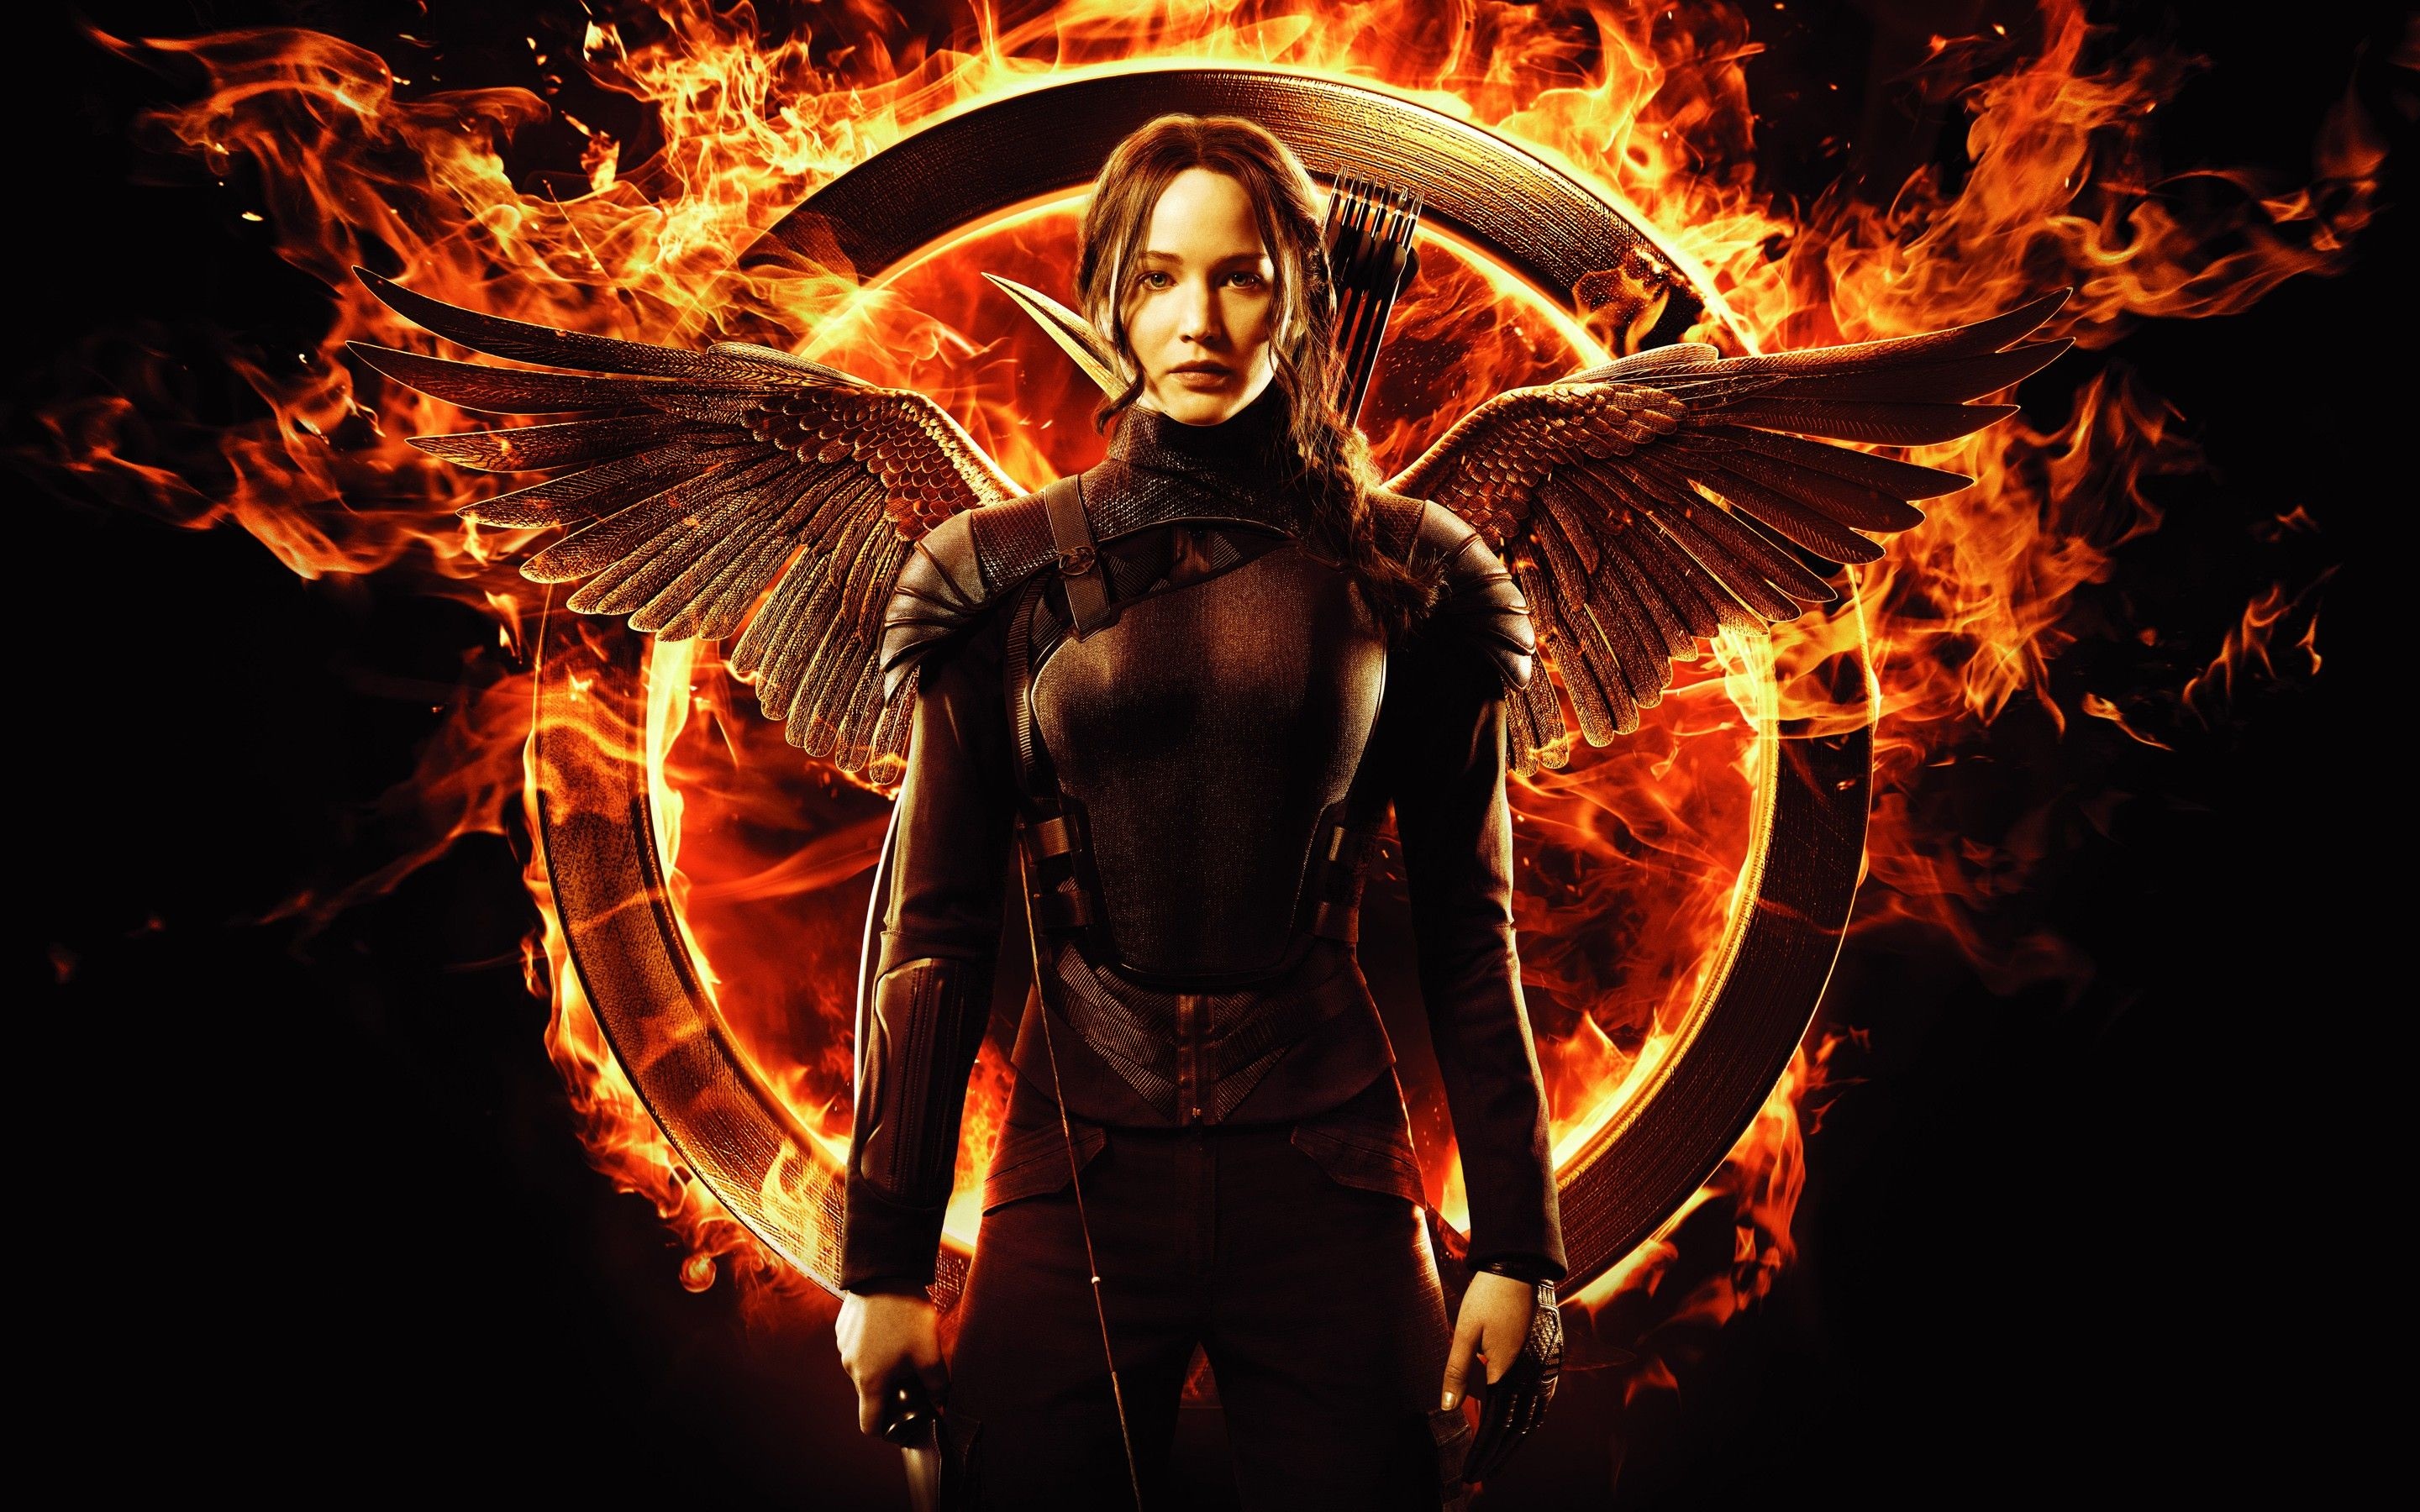 Jennifer Lawrence in Hunger Games wallpapers, Hunger Games wallpaper, Hunger Games, 2880x1800 HD Desktop